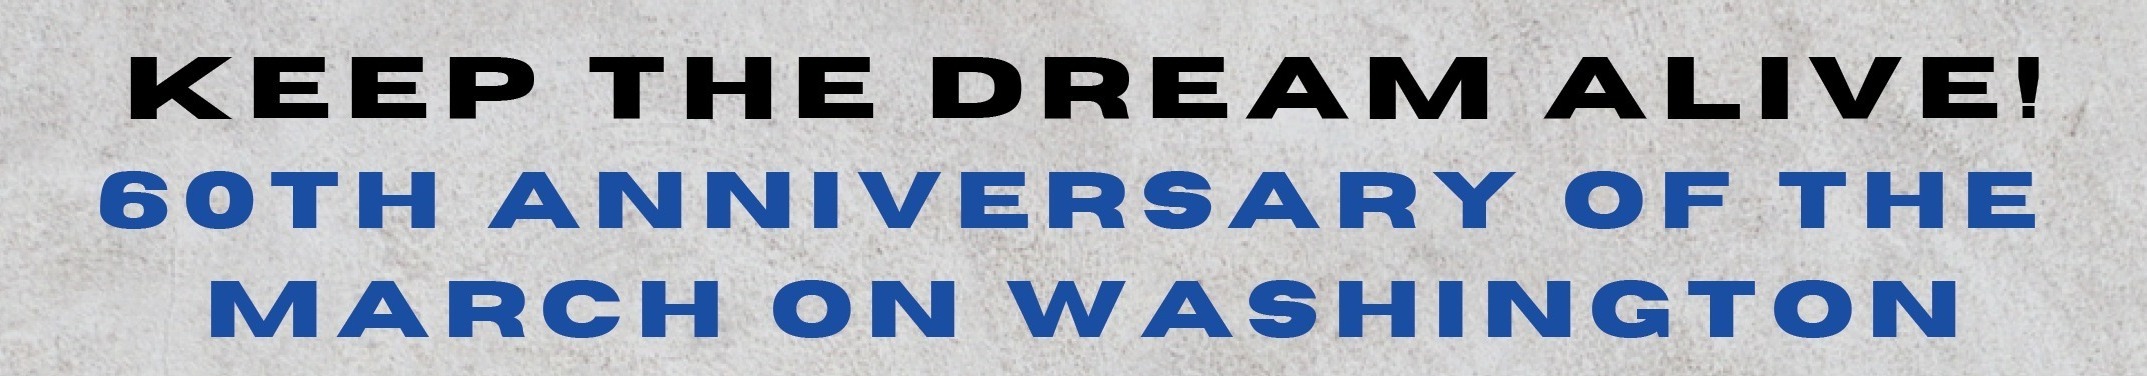 Keep The Dream Alive Banner